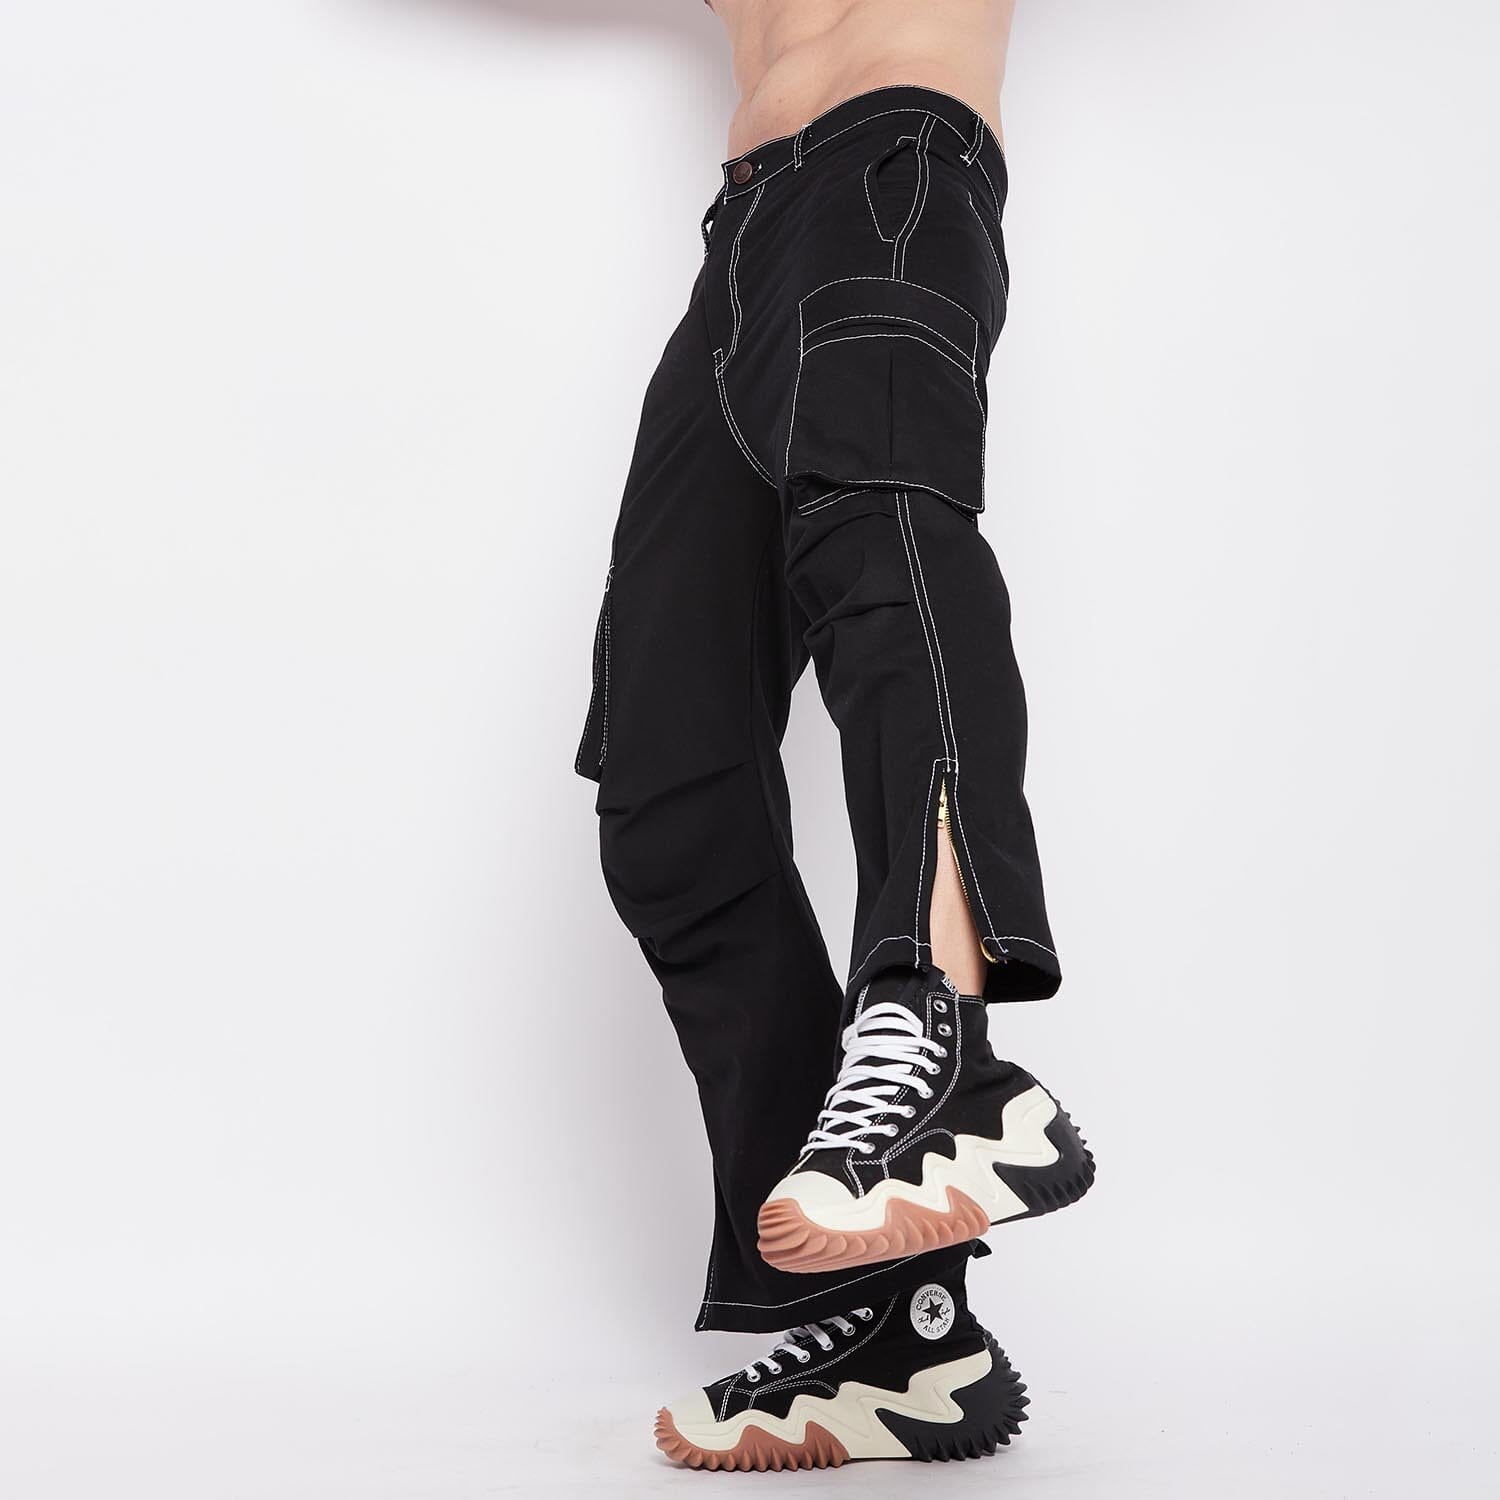 Buy HERE&NOW Men Black Cargo Trousers - Trousers for Men 13767600 | Myntra